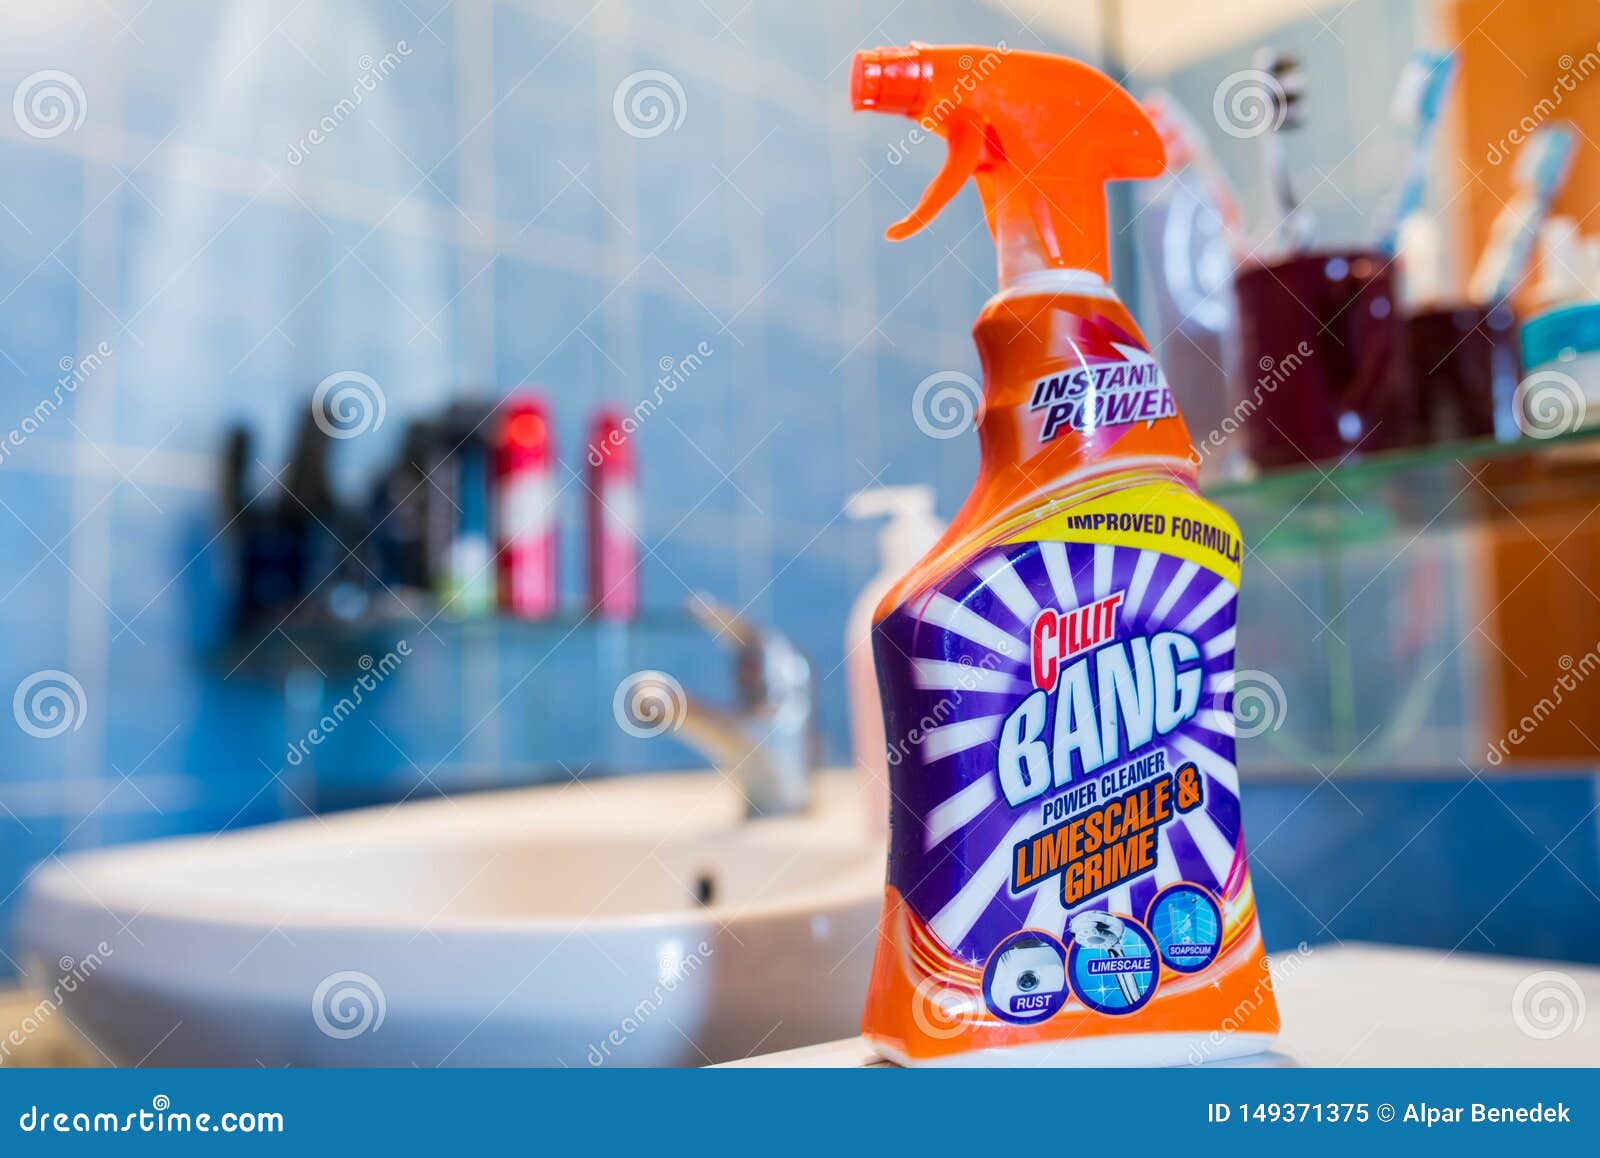 Cillit Bang Liquid Cleaner in the Bathroom, Shallow Depth of Field